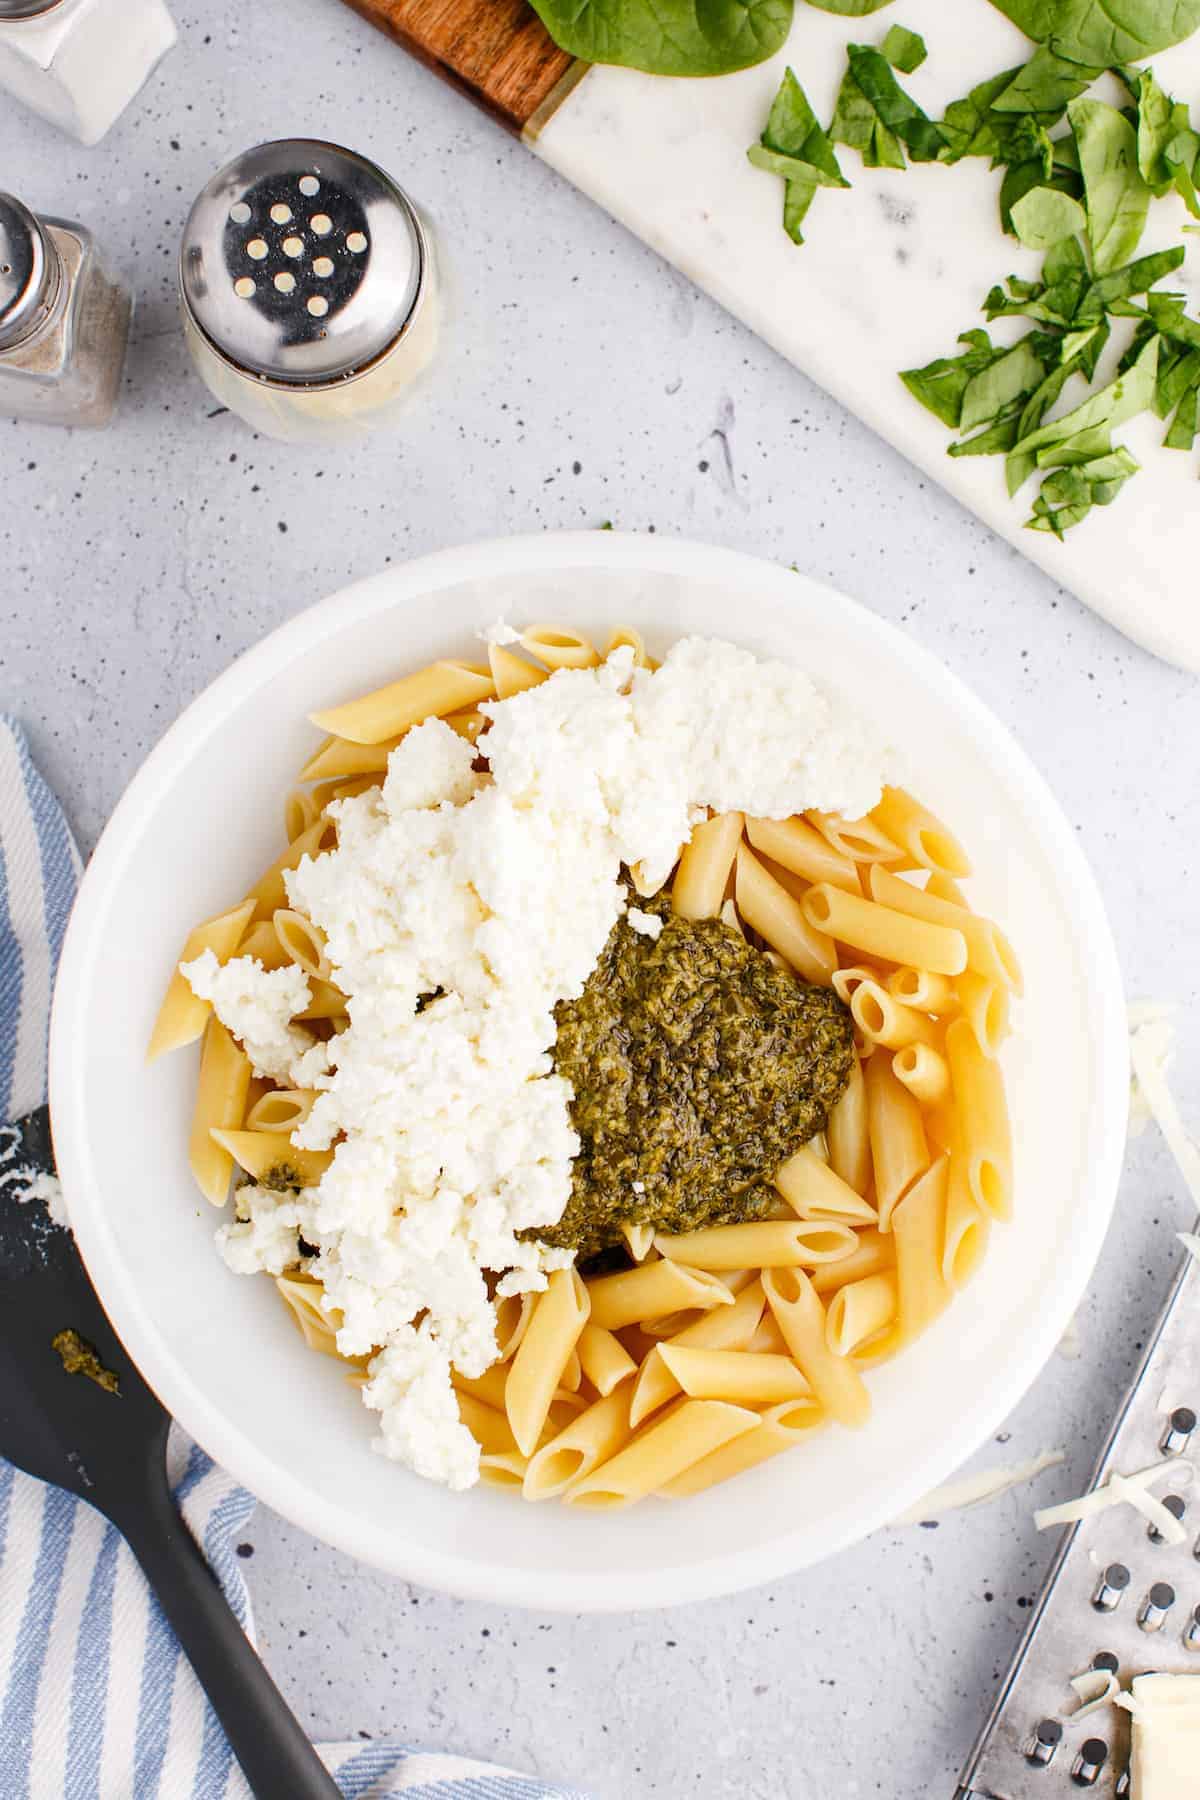 pesto and ricotta cheese added to the top of the pasta in the large white bowl